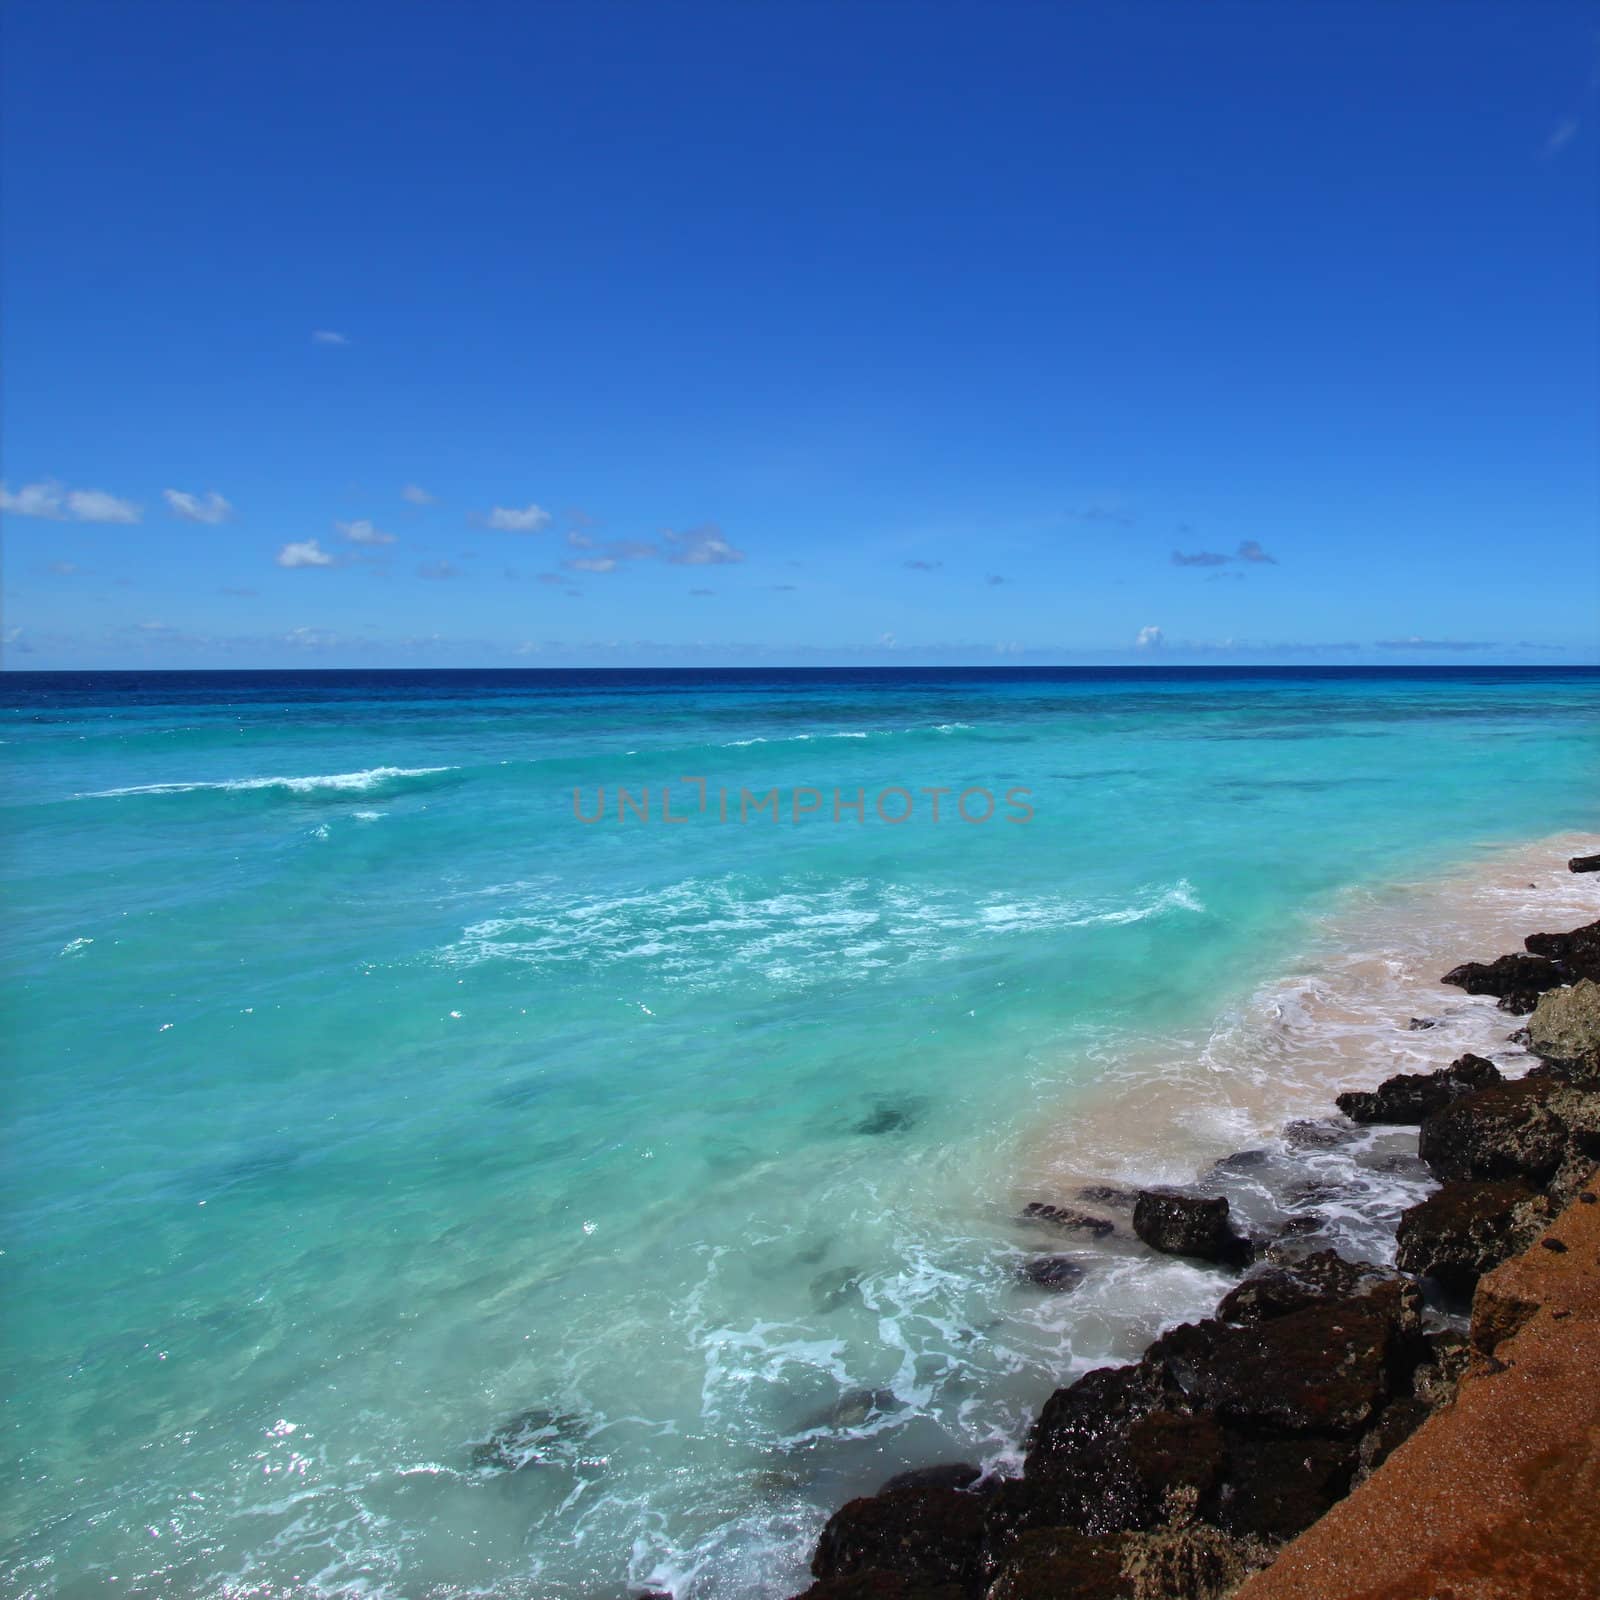 A view of the Atlantic Ocean from the rocky coast of Barbados.